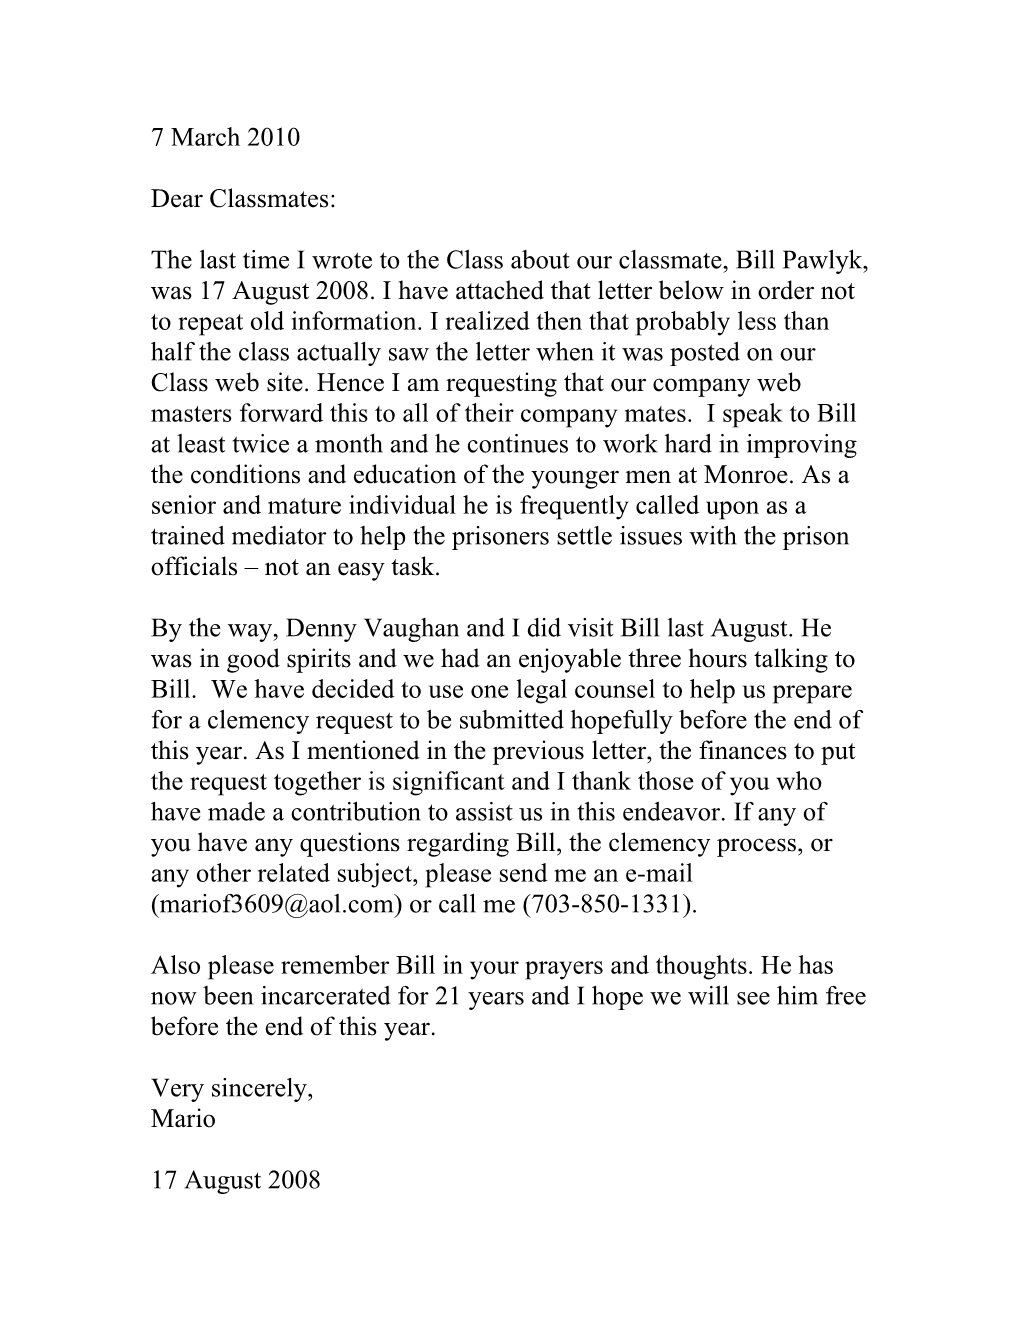 7 March 2010Dear Classmates:The Last Time I Wrote to the Class About Our Classmate, Bill